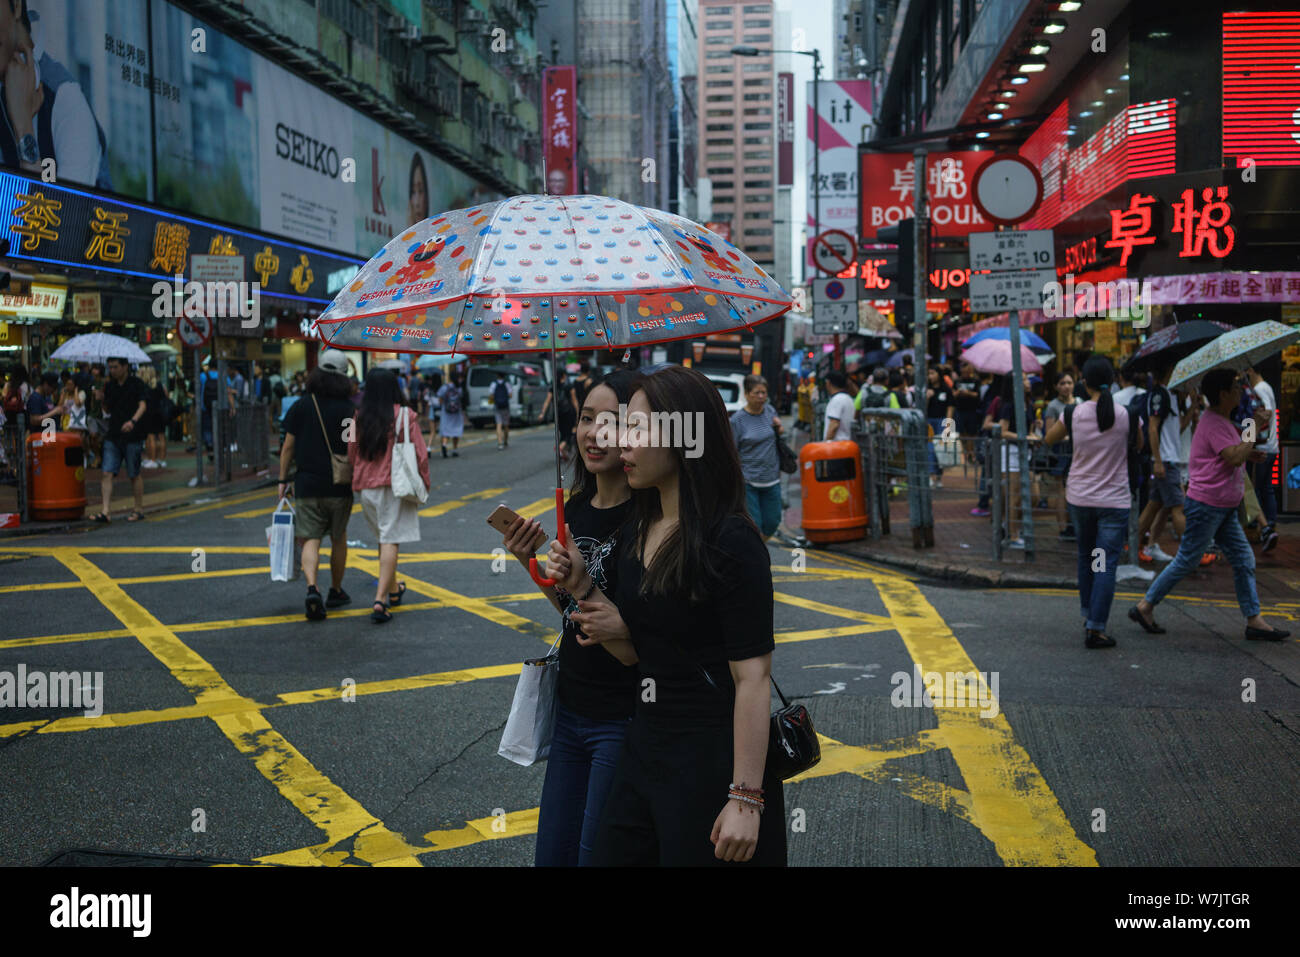 Women share an umbrella as they walk through the Mong Kok shopping district in Hong Kong, China, 28 August 2017.   Hong Kong is on the verge of seeing Stock Photo